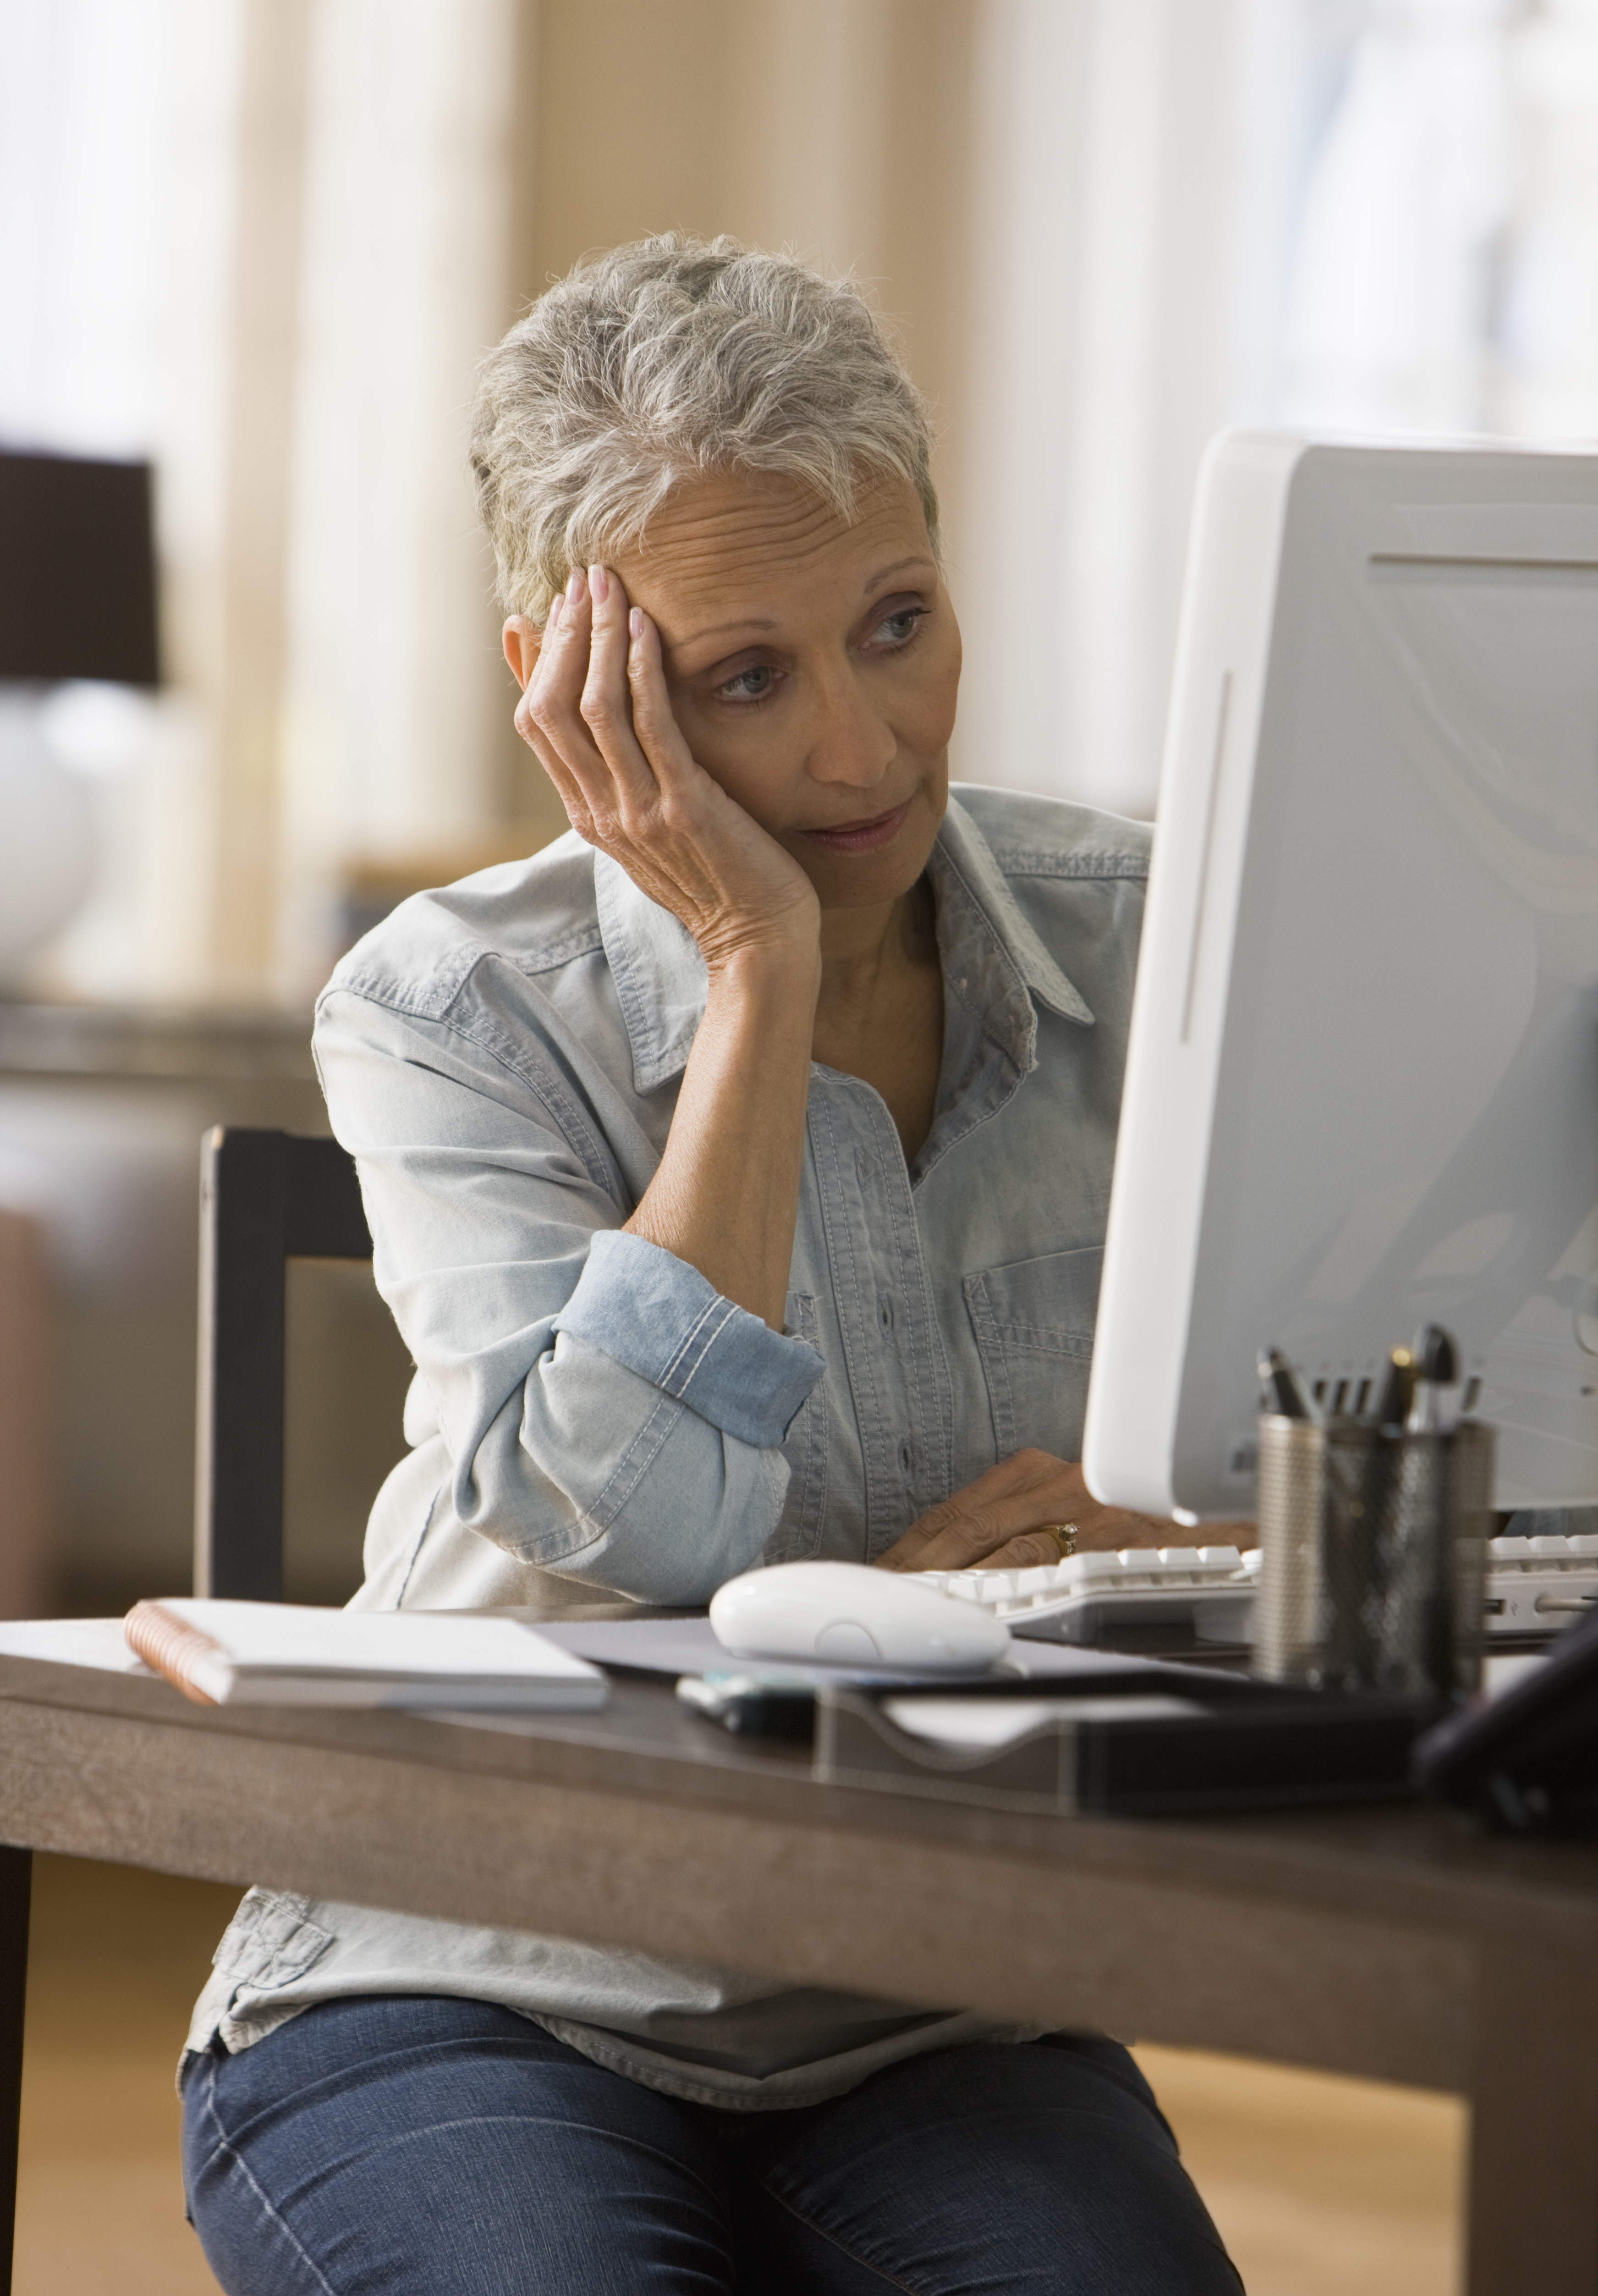 A woman looking bored in front of her computer